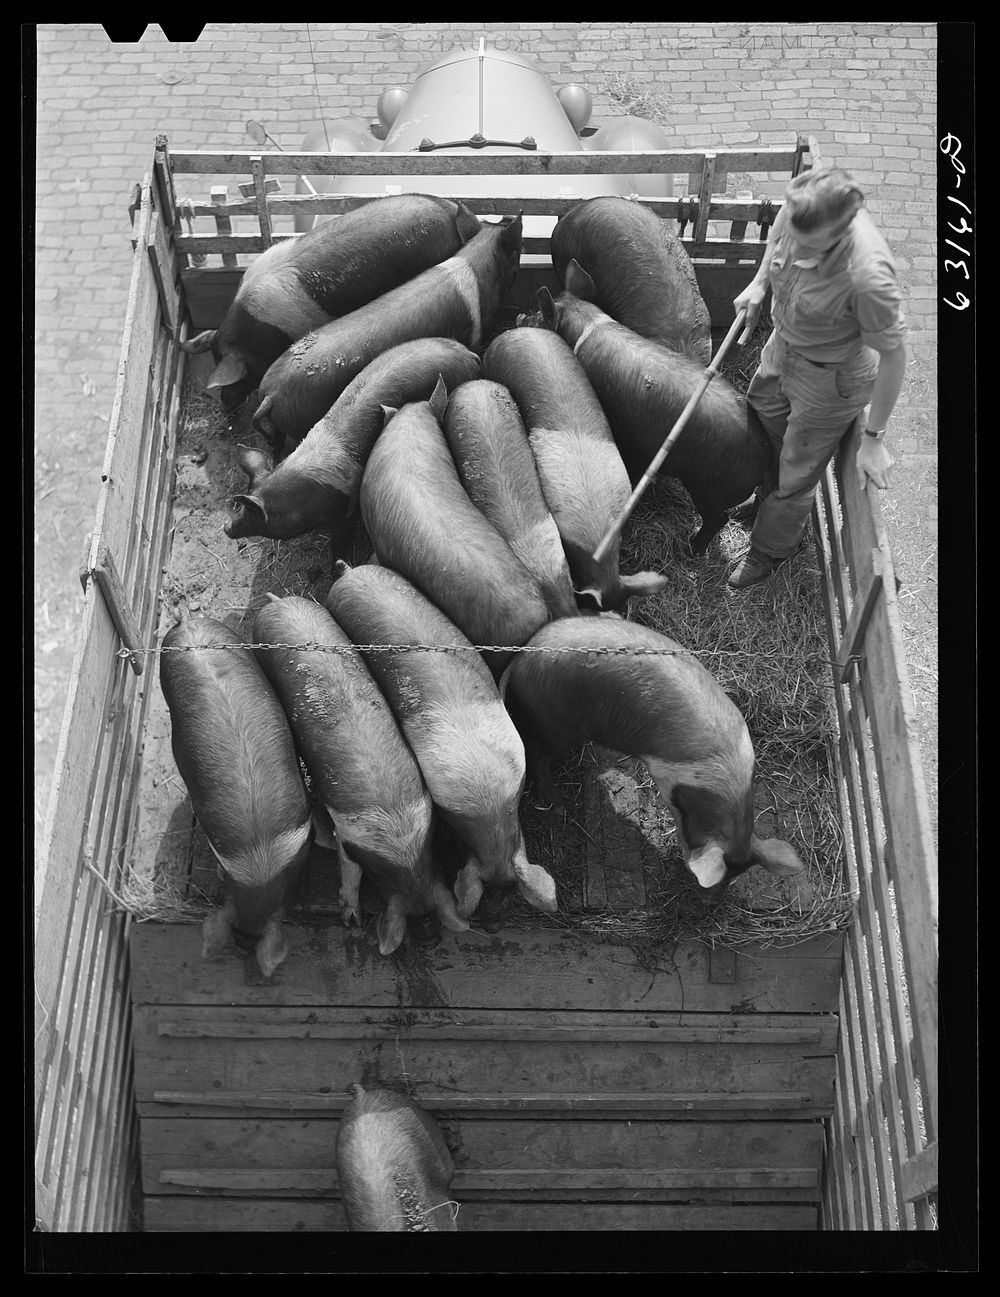 [Untitled photo, possibly related to: Unloading pigs from truck at Union Stockyard. Chicago, Illinois]. Sourced from the…